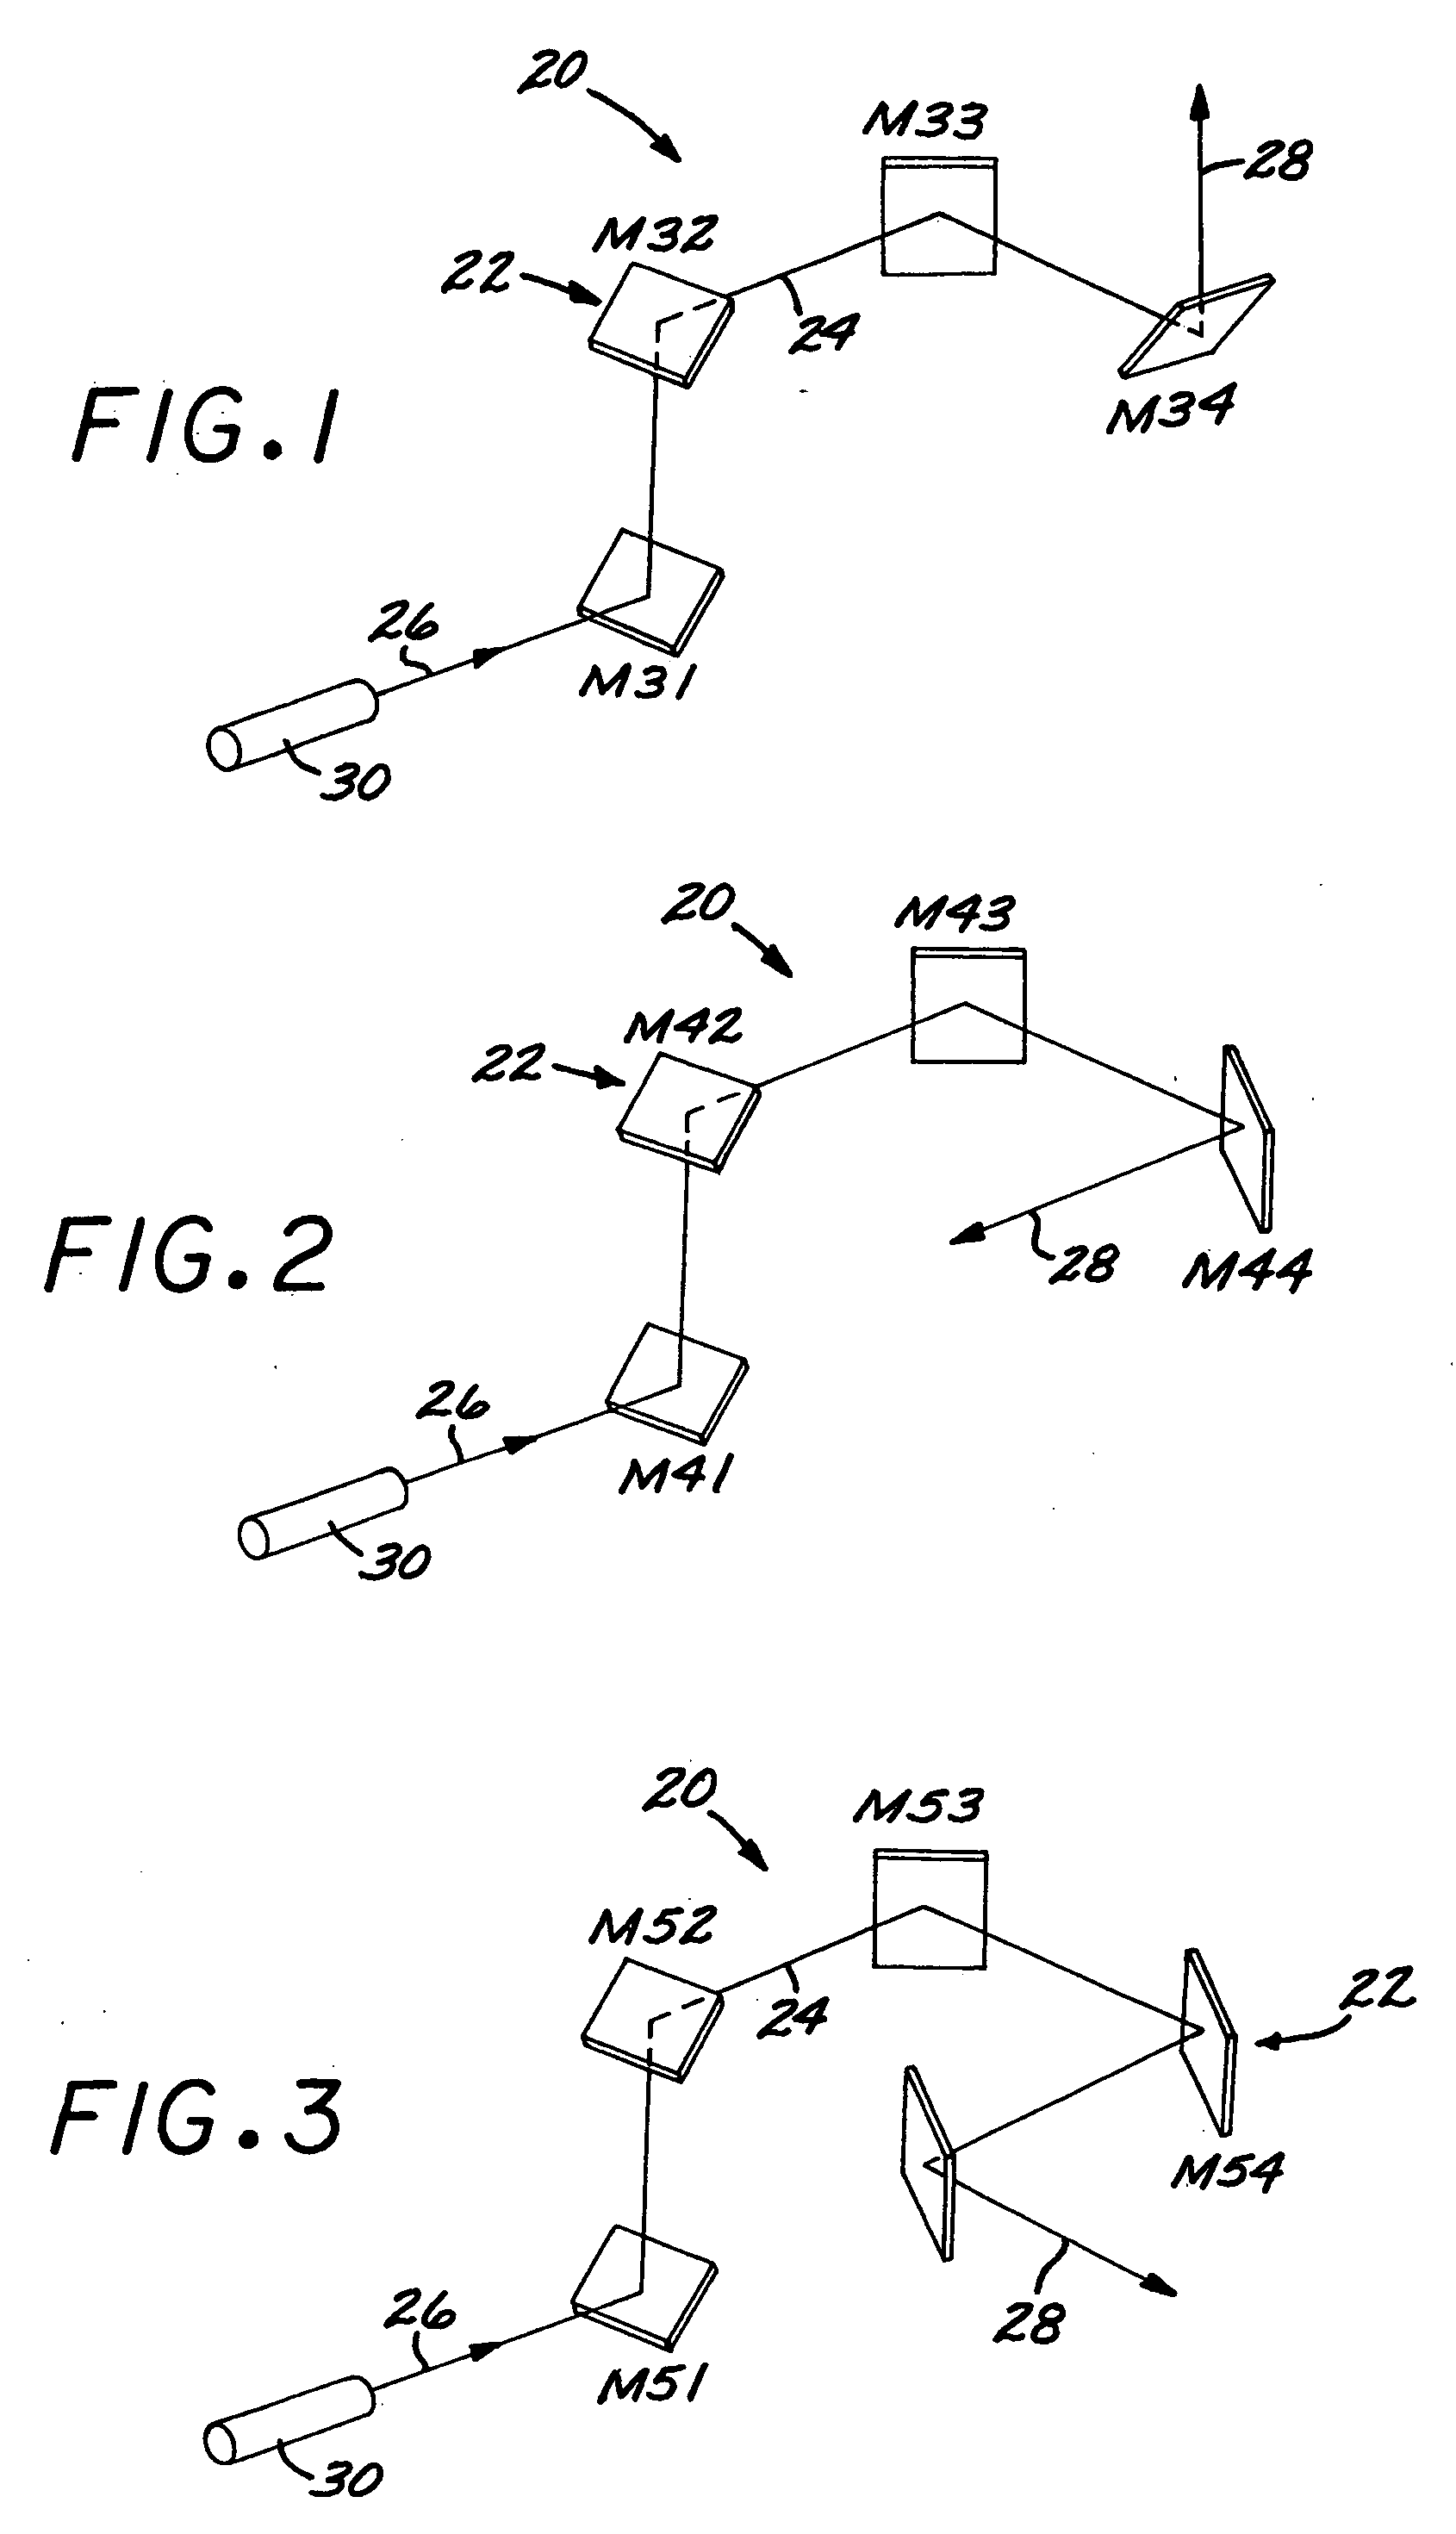 Beam-steering apparatus having five degrees of freedom of line-of-sight steering